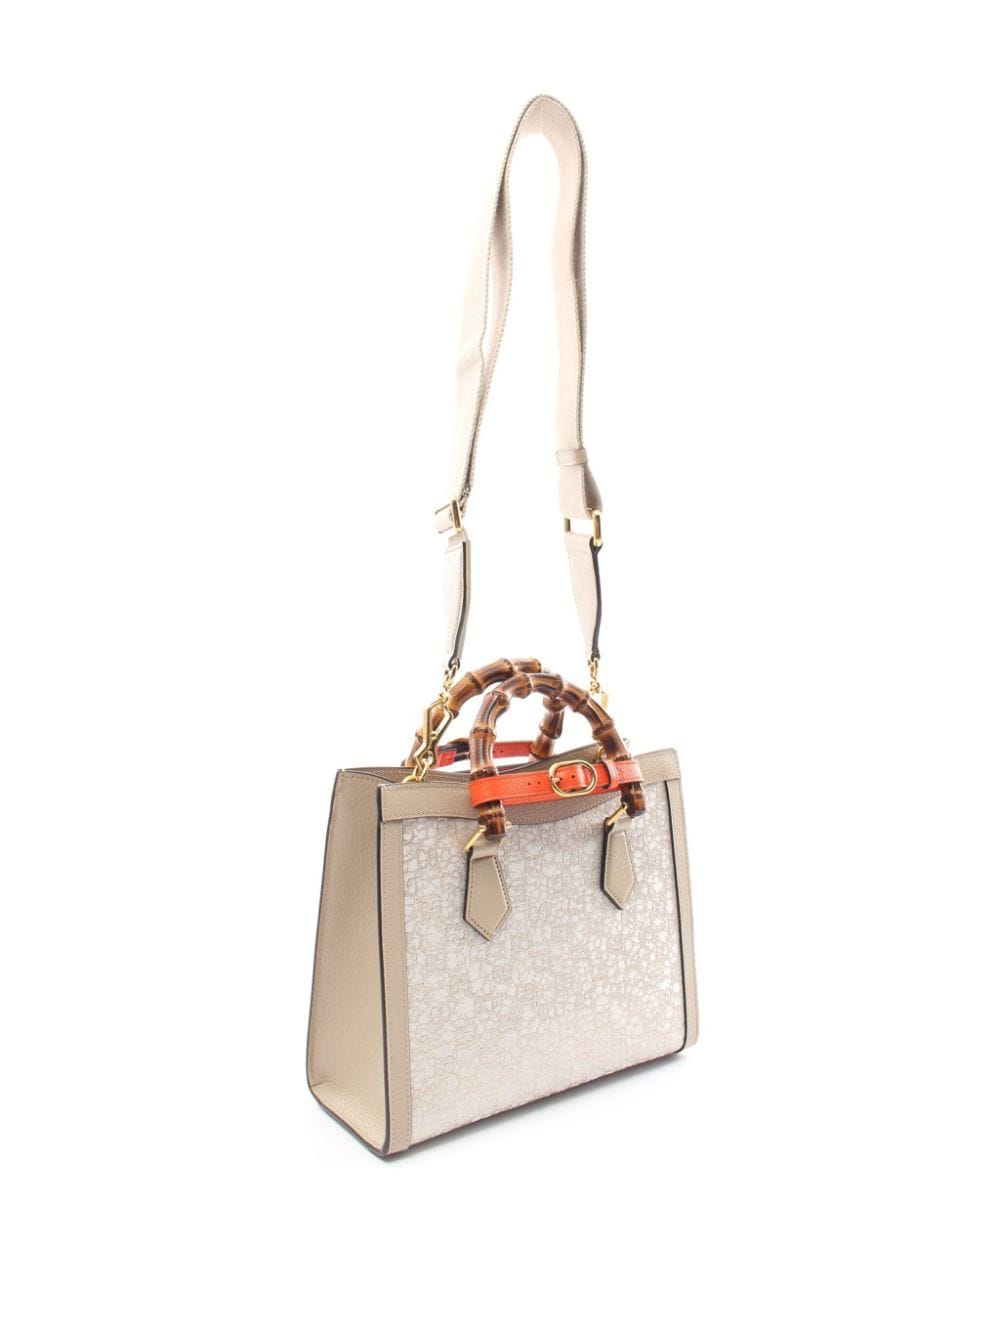 Gucci Pre-Owned 2020 small Diana two-way handbag - Beige